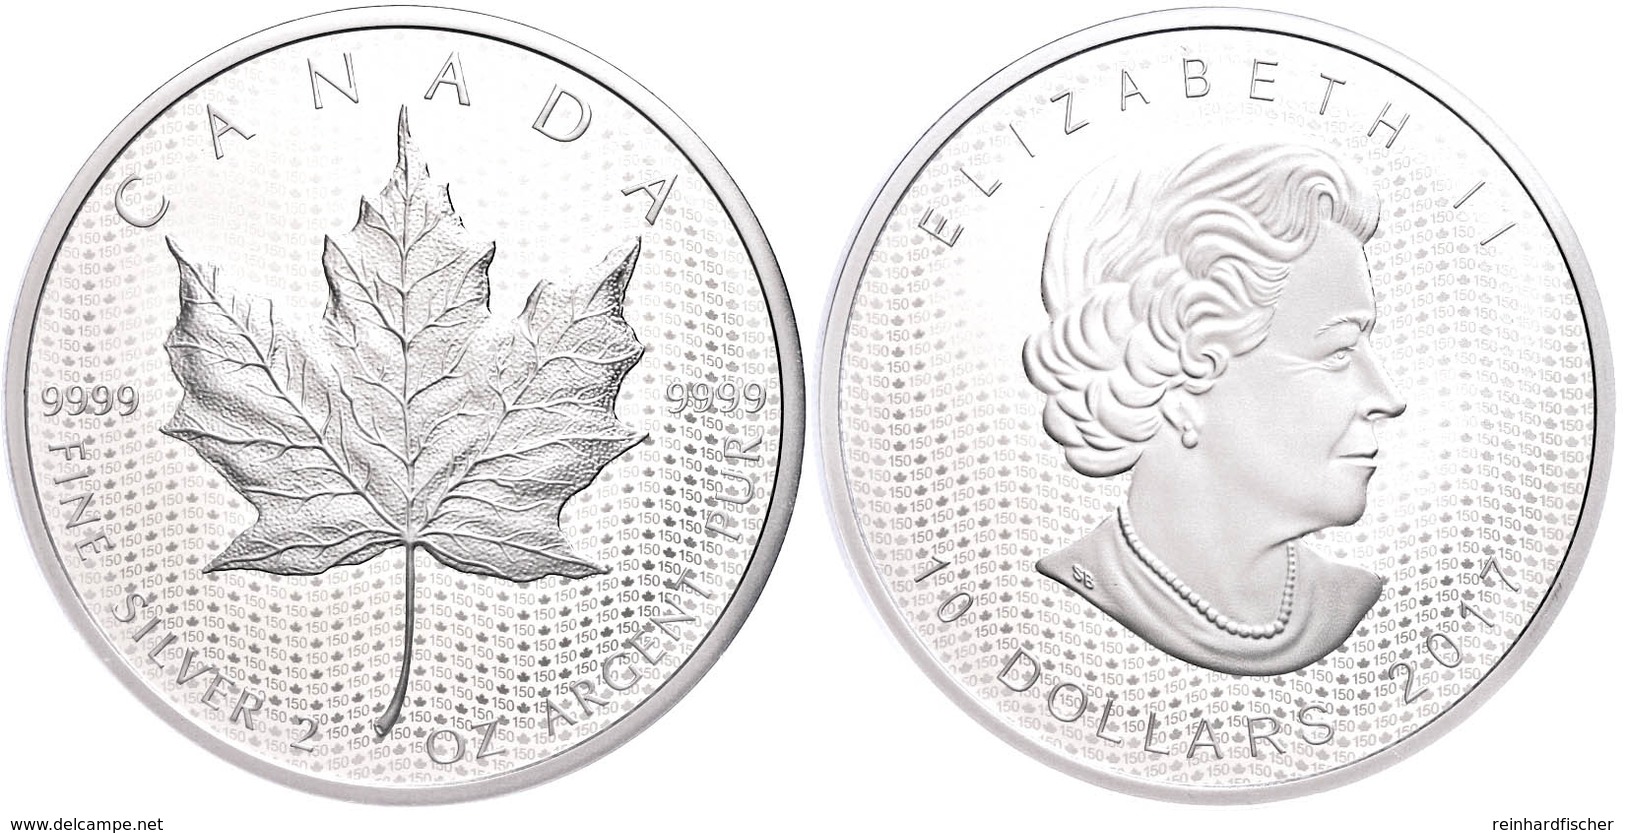 10 Dollars, 2017, Iconic Maple Leaf, In Slab Der NGC Mit Der Bewertung PF70 Matte, Early Released Canada Label. - Canada